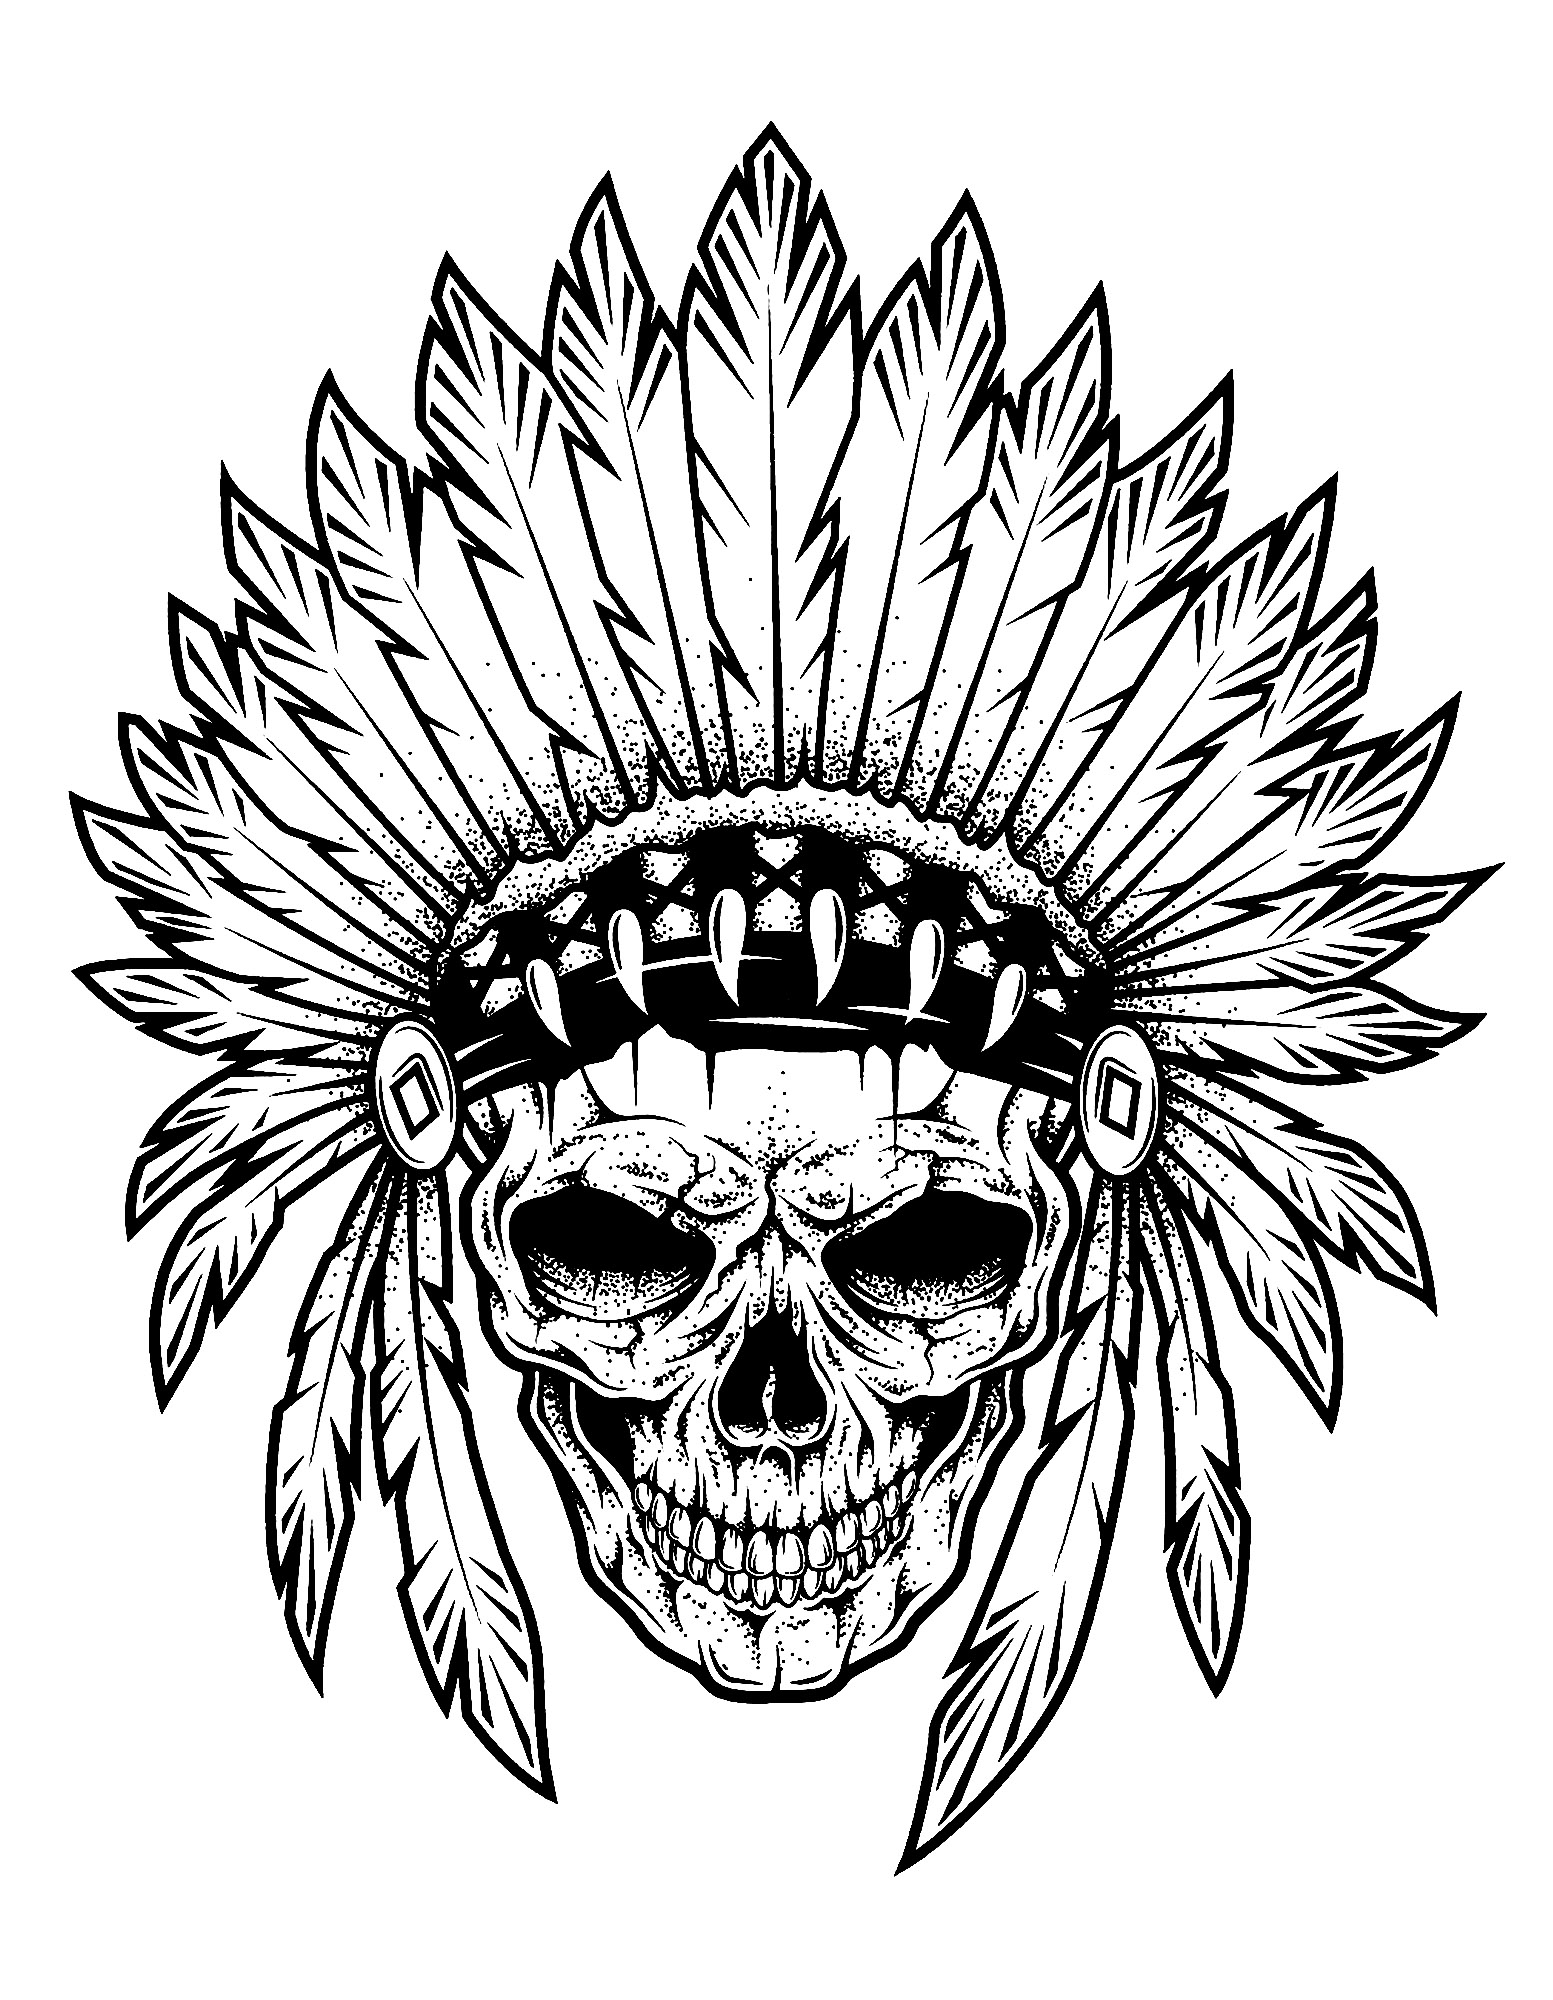 Indian chief skull - Native American Adult Coloring Pages